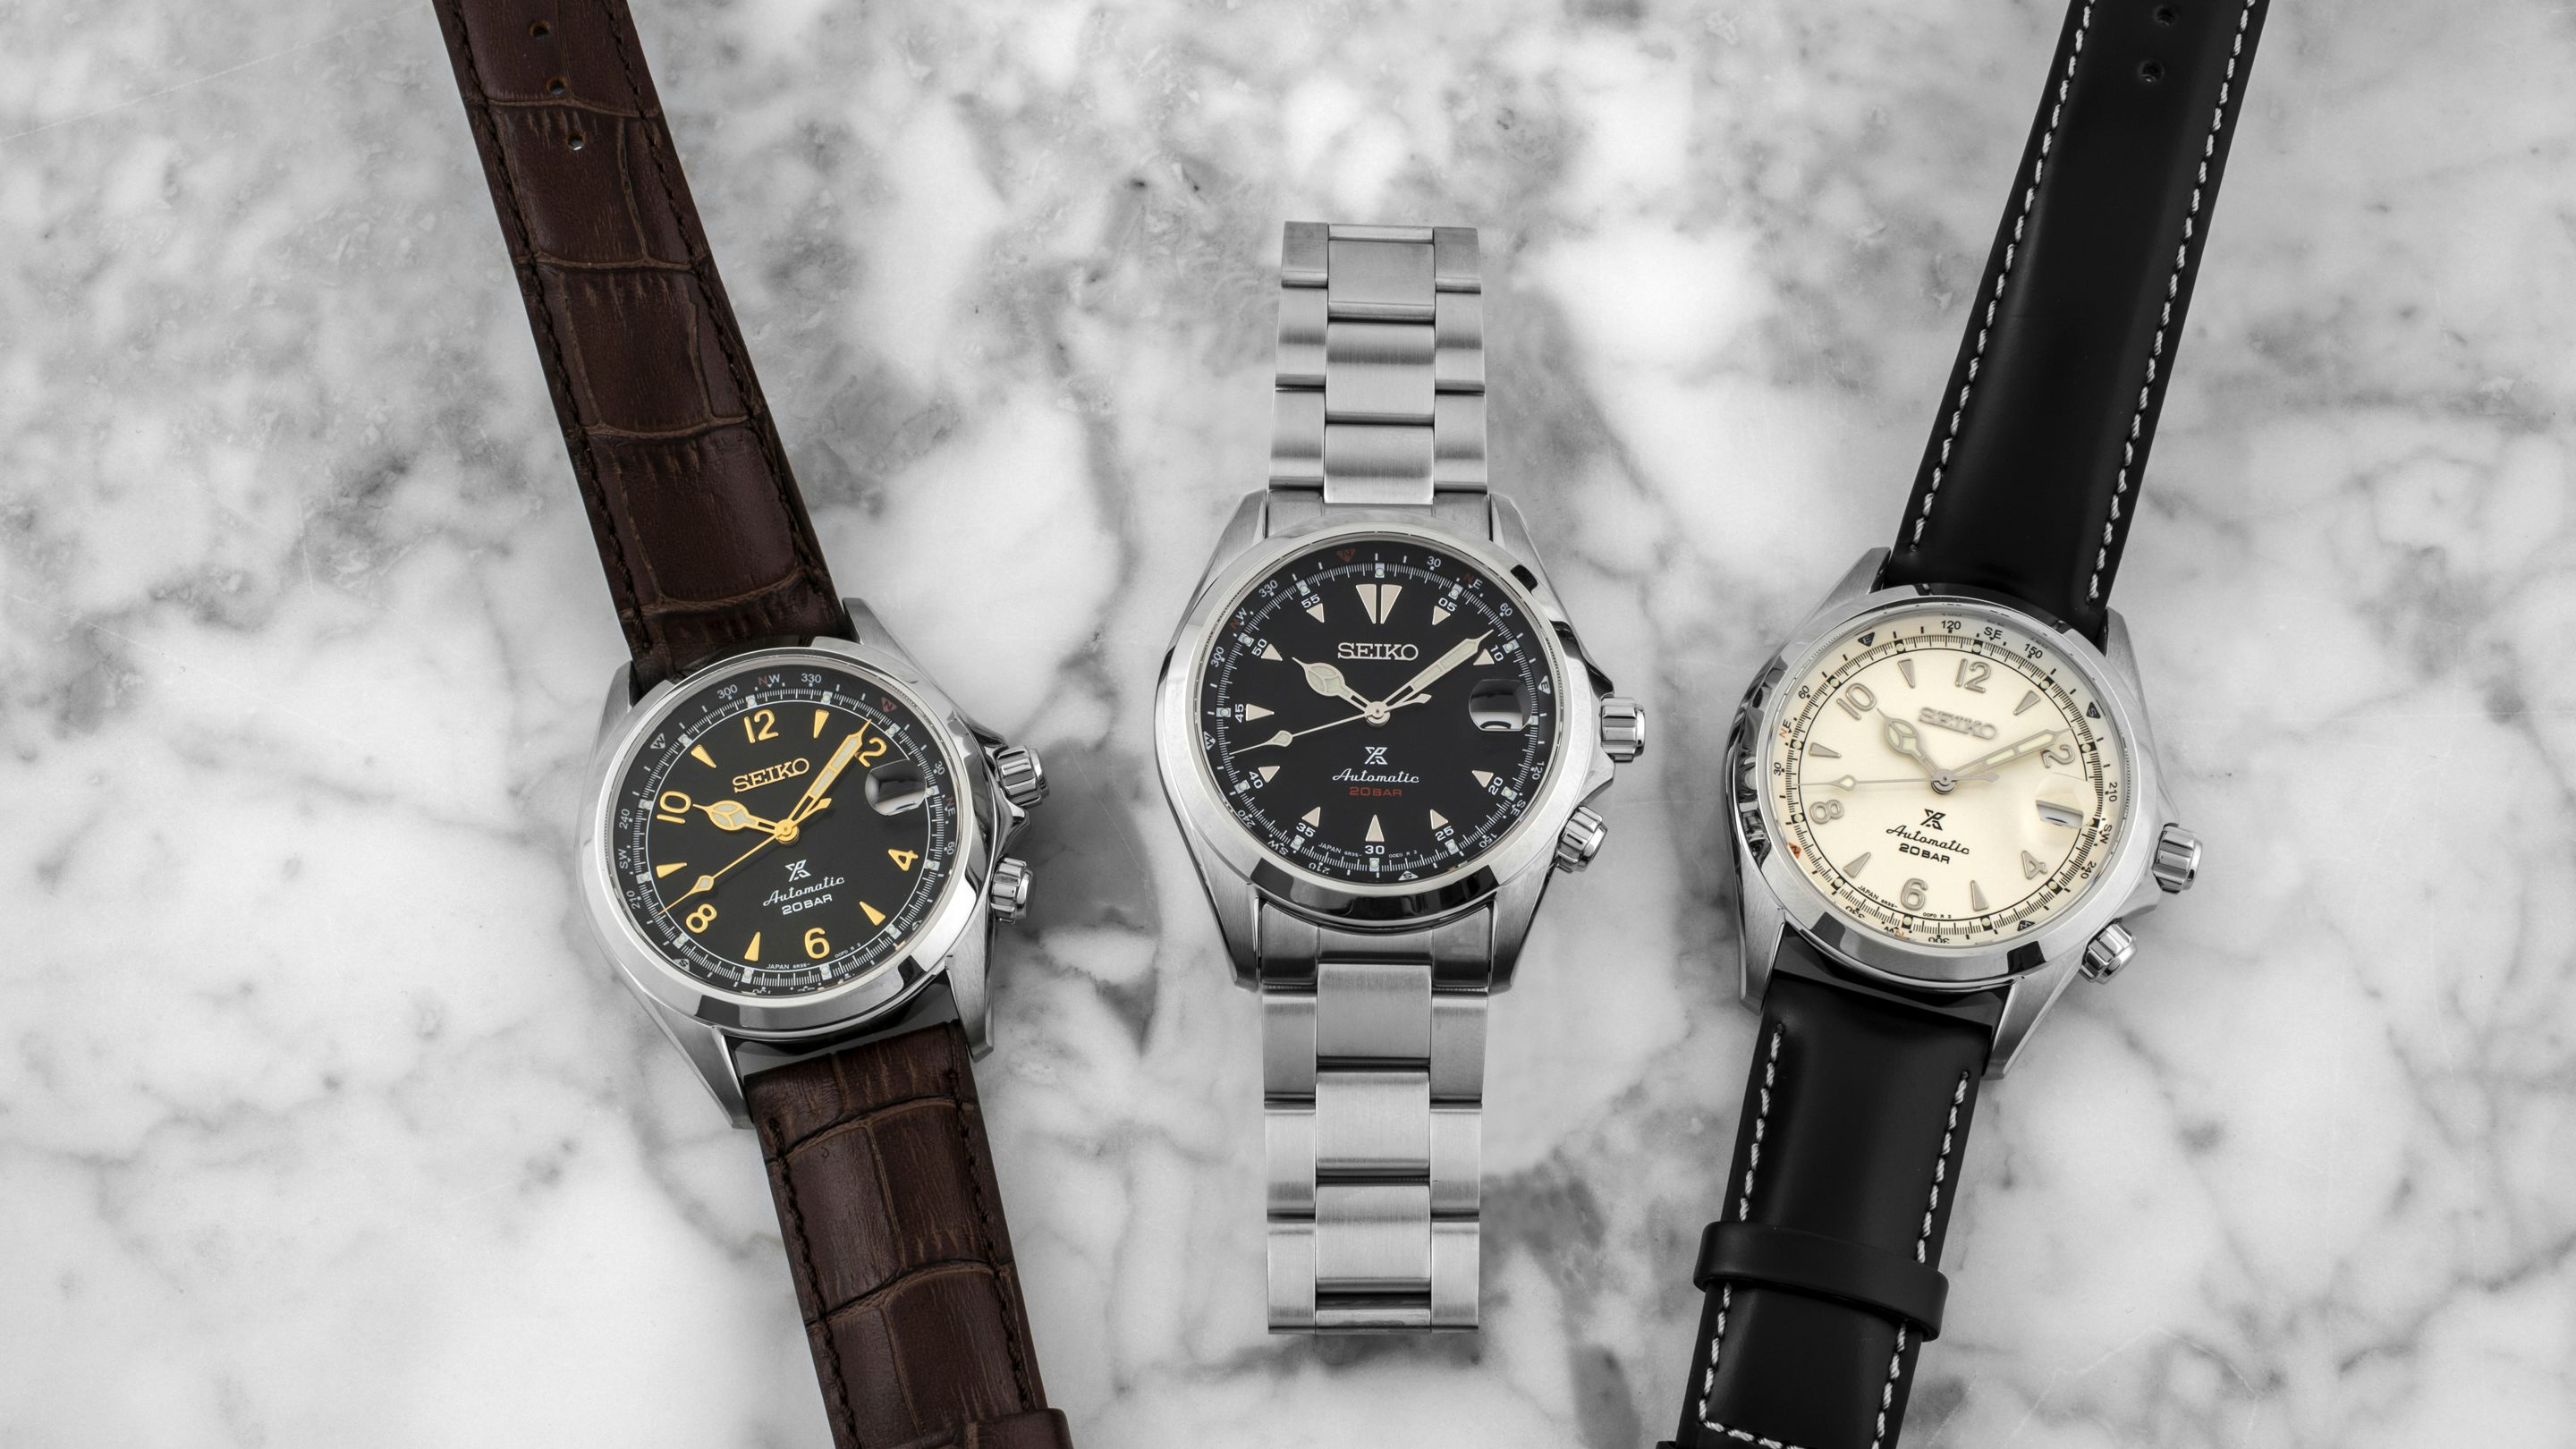 Til Ni Minearbejder koncept Introducing: Three Alpinist-Inspired Seiko Prospex Watches - Hodinkee